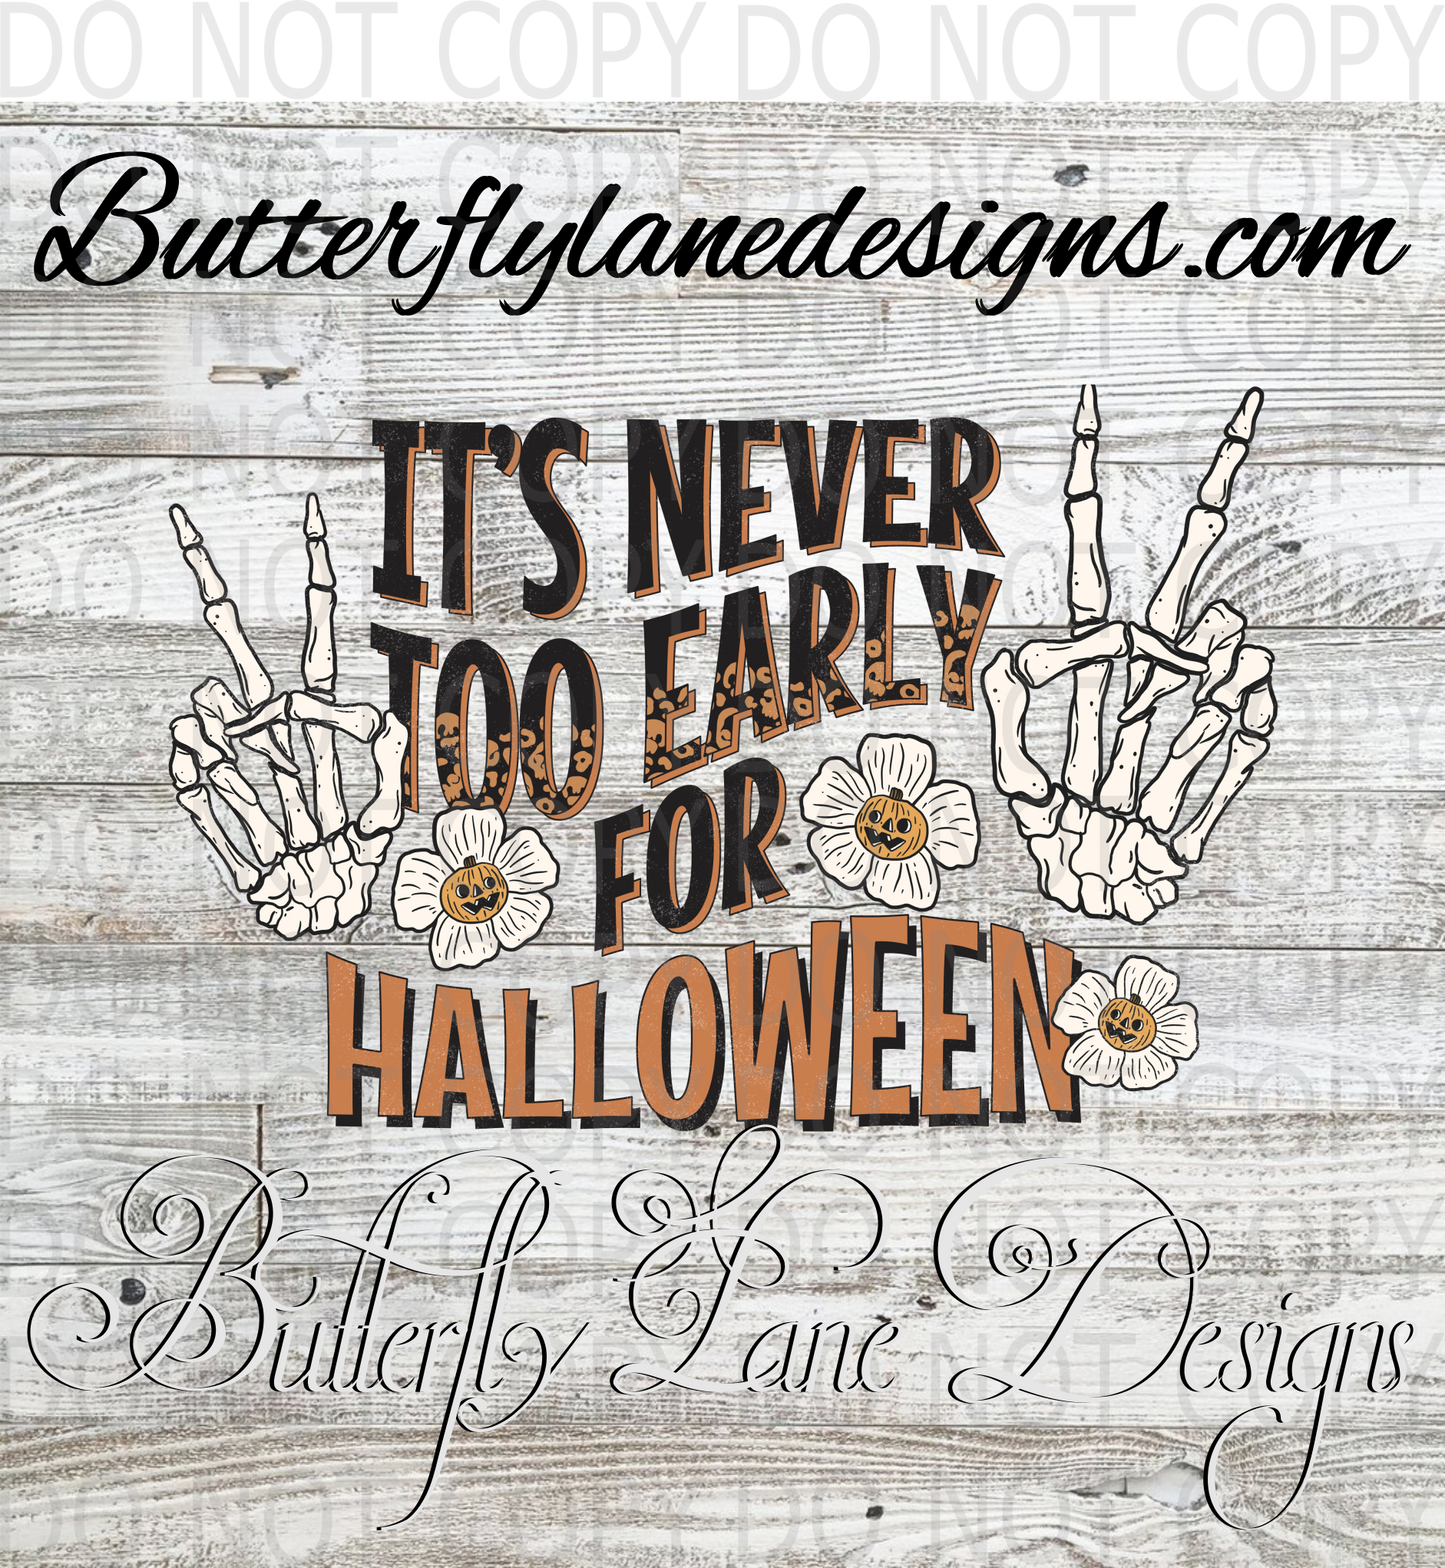 Never too early for Halloween :: Clear Decal :: VC Decal